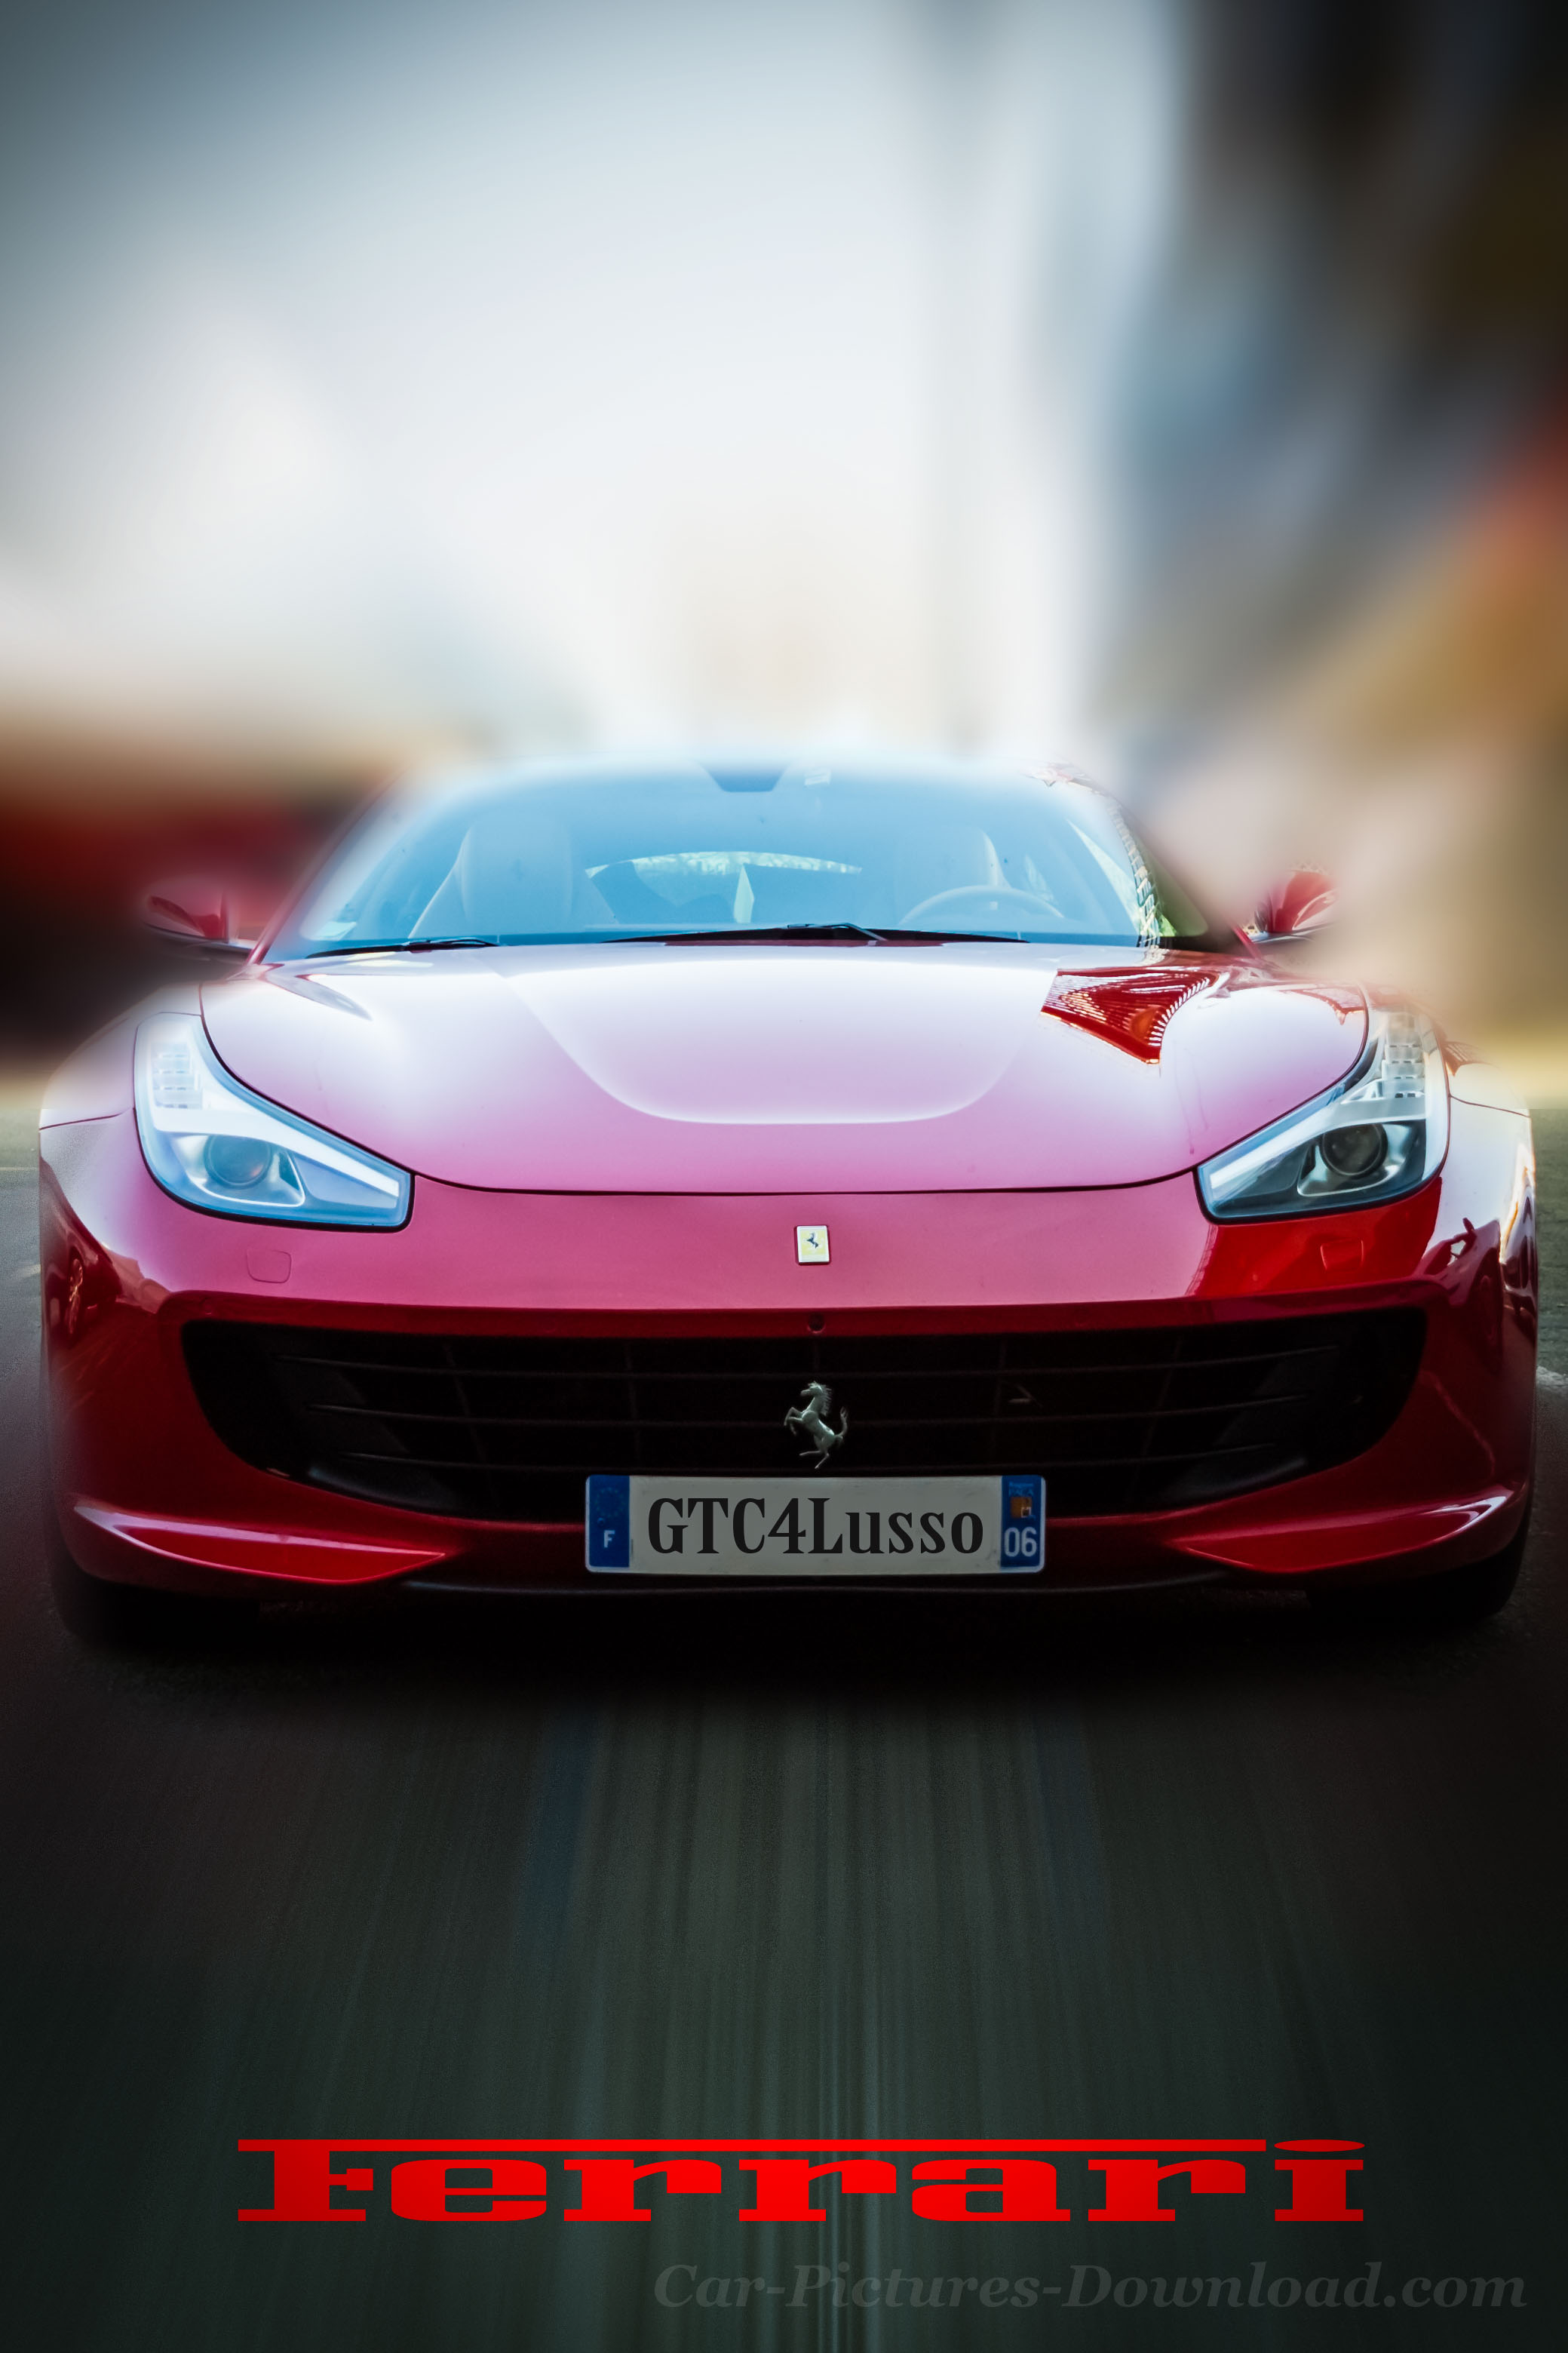 Ferrari Wallpaper HD For All Devices In Best Quality